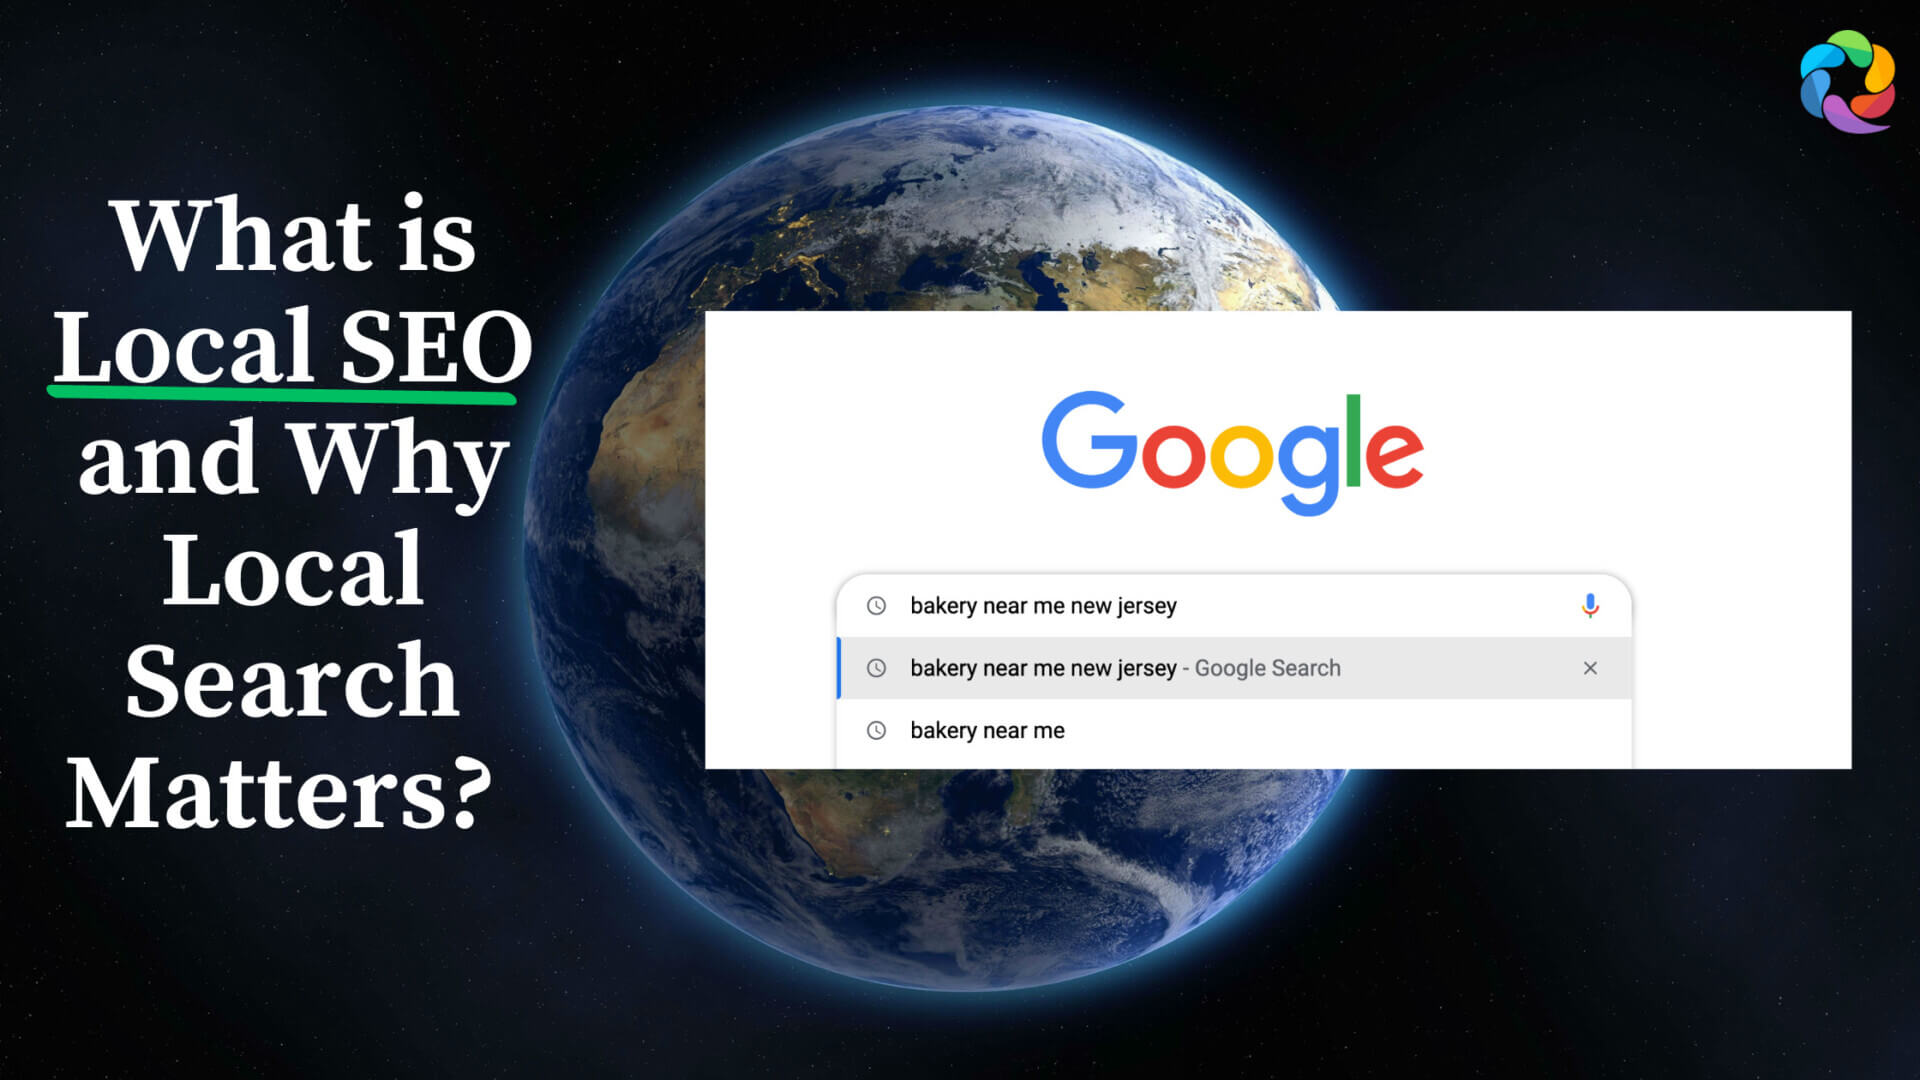 What is Local SEO? Why Local Search Matters?